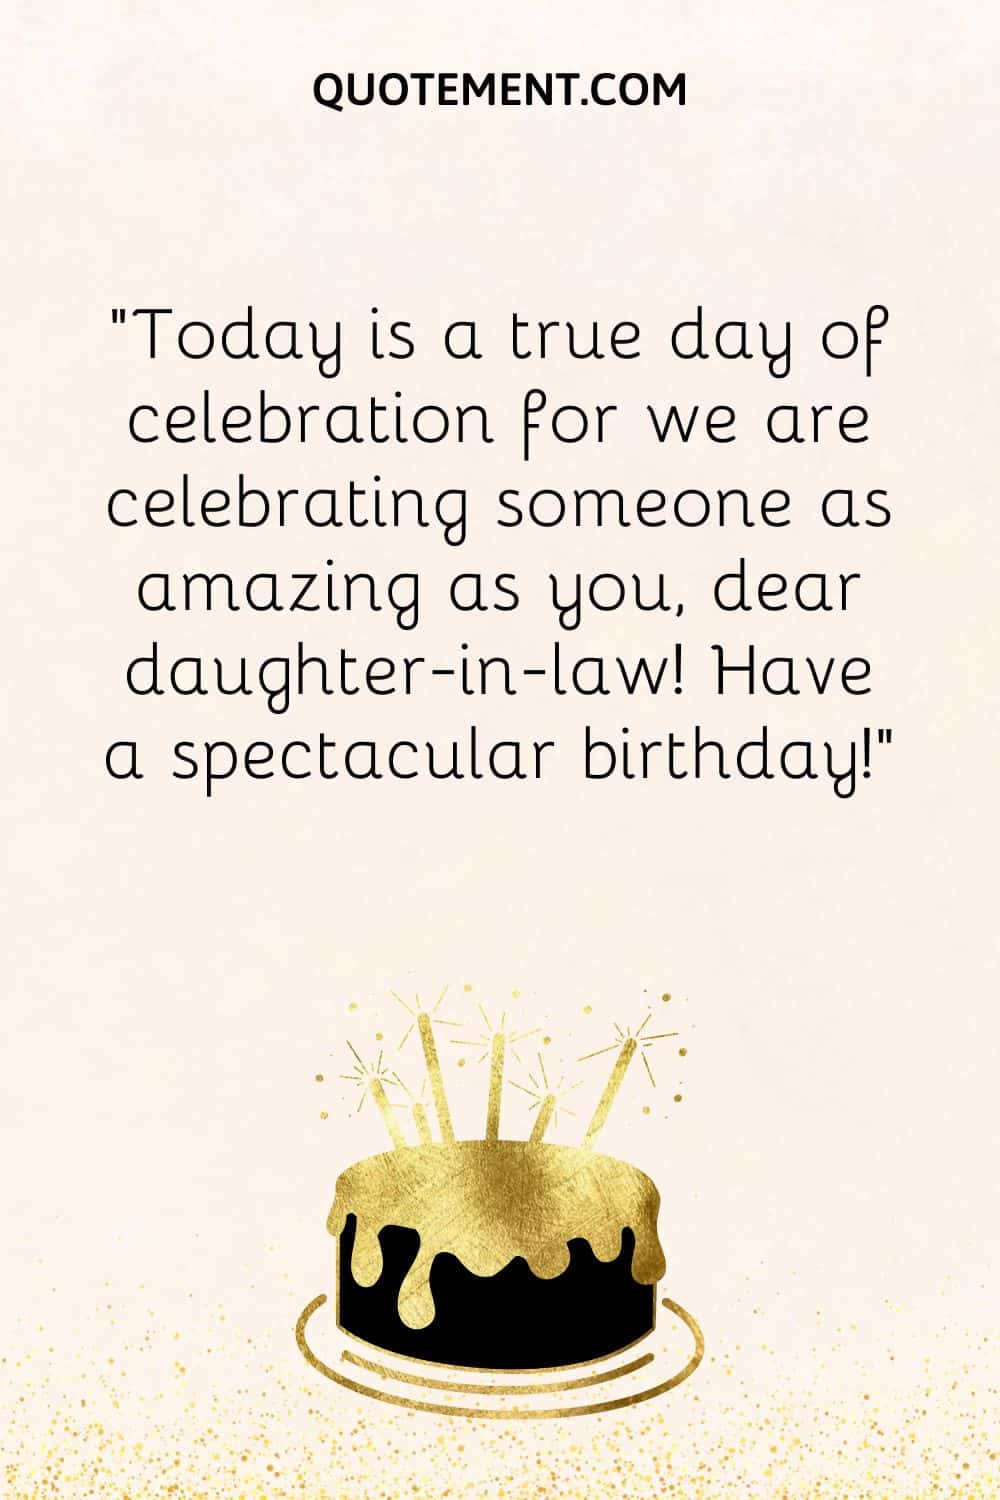 Today is a true day of celebration for we are celebrating someone as amazing as you